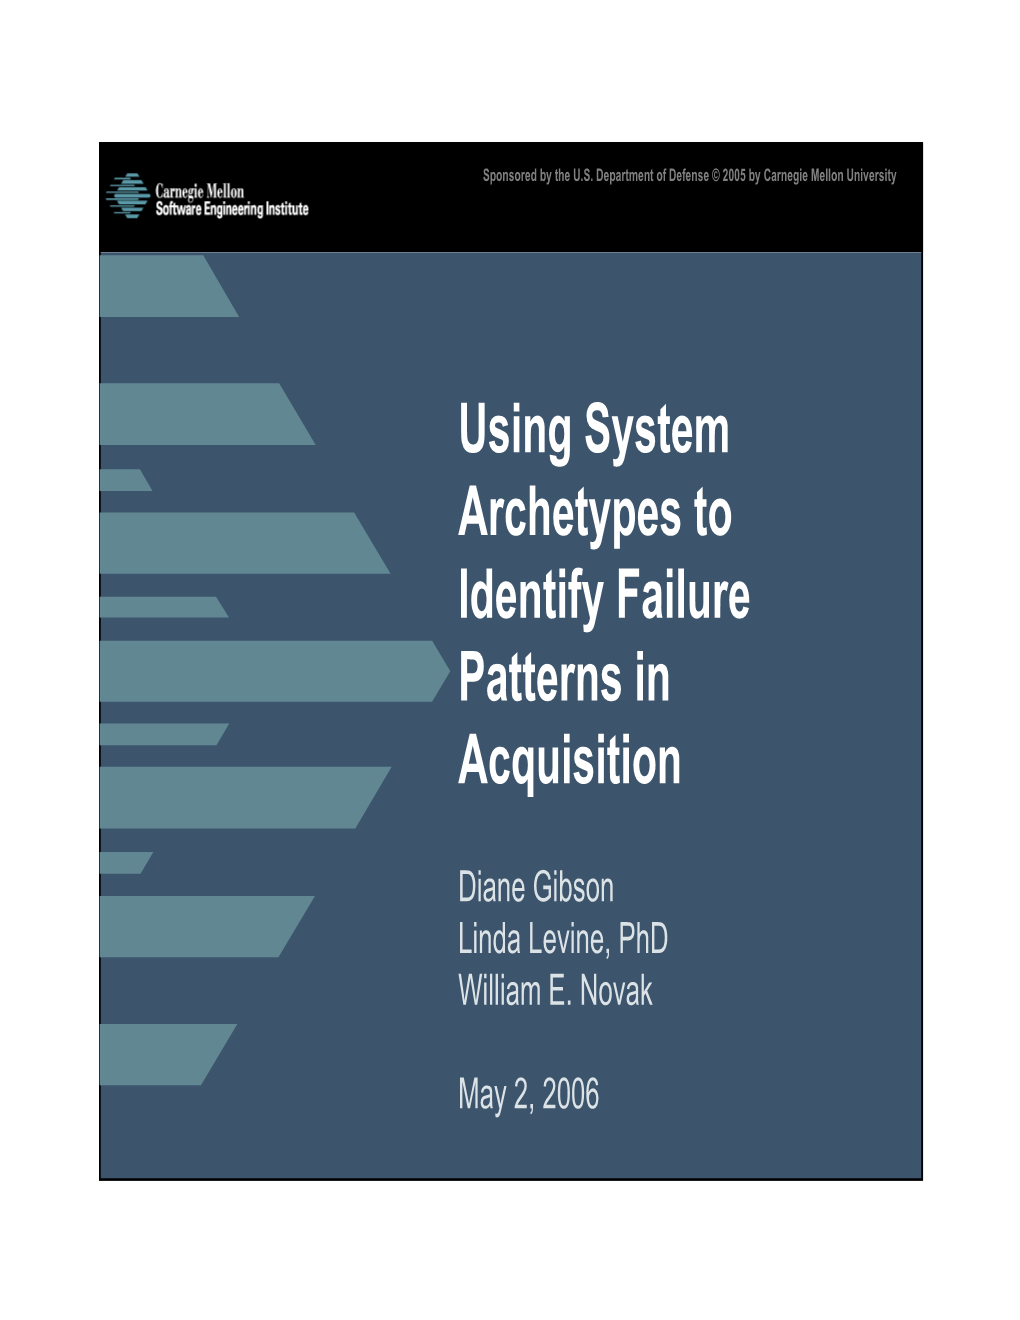 Using System Archetypes to Identify Failure Patterns in Acquisition